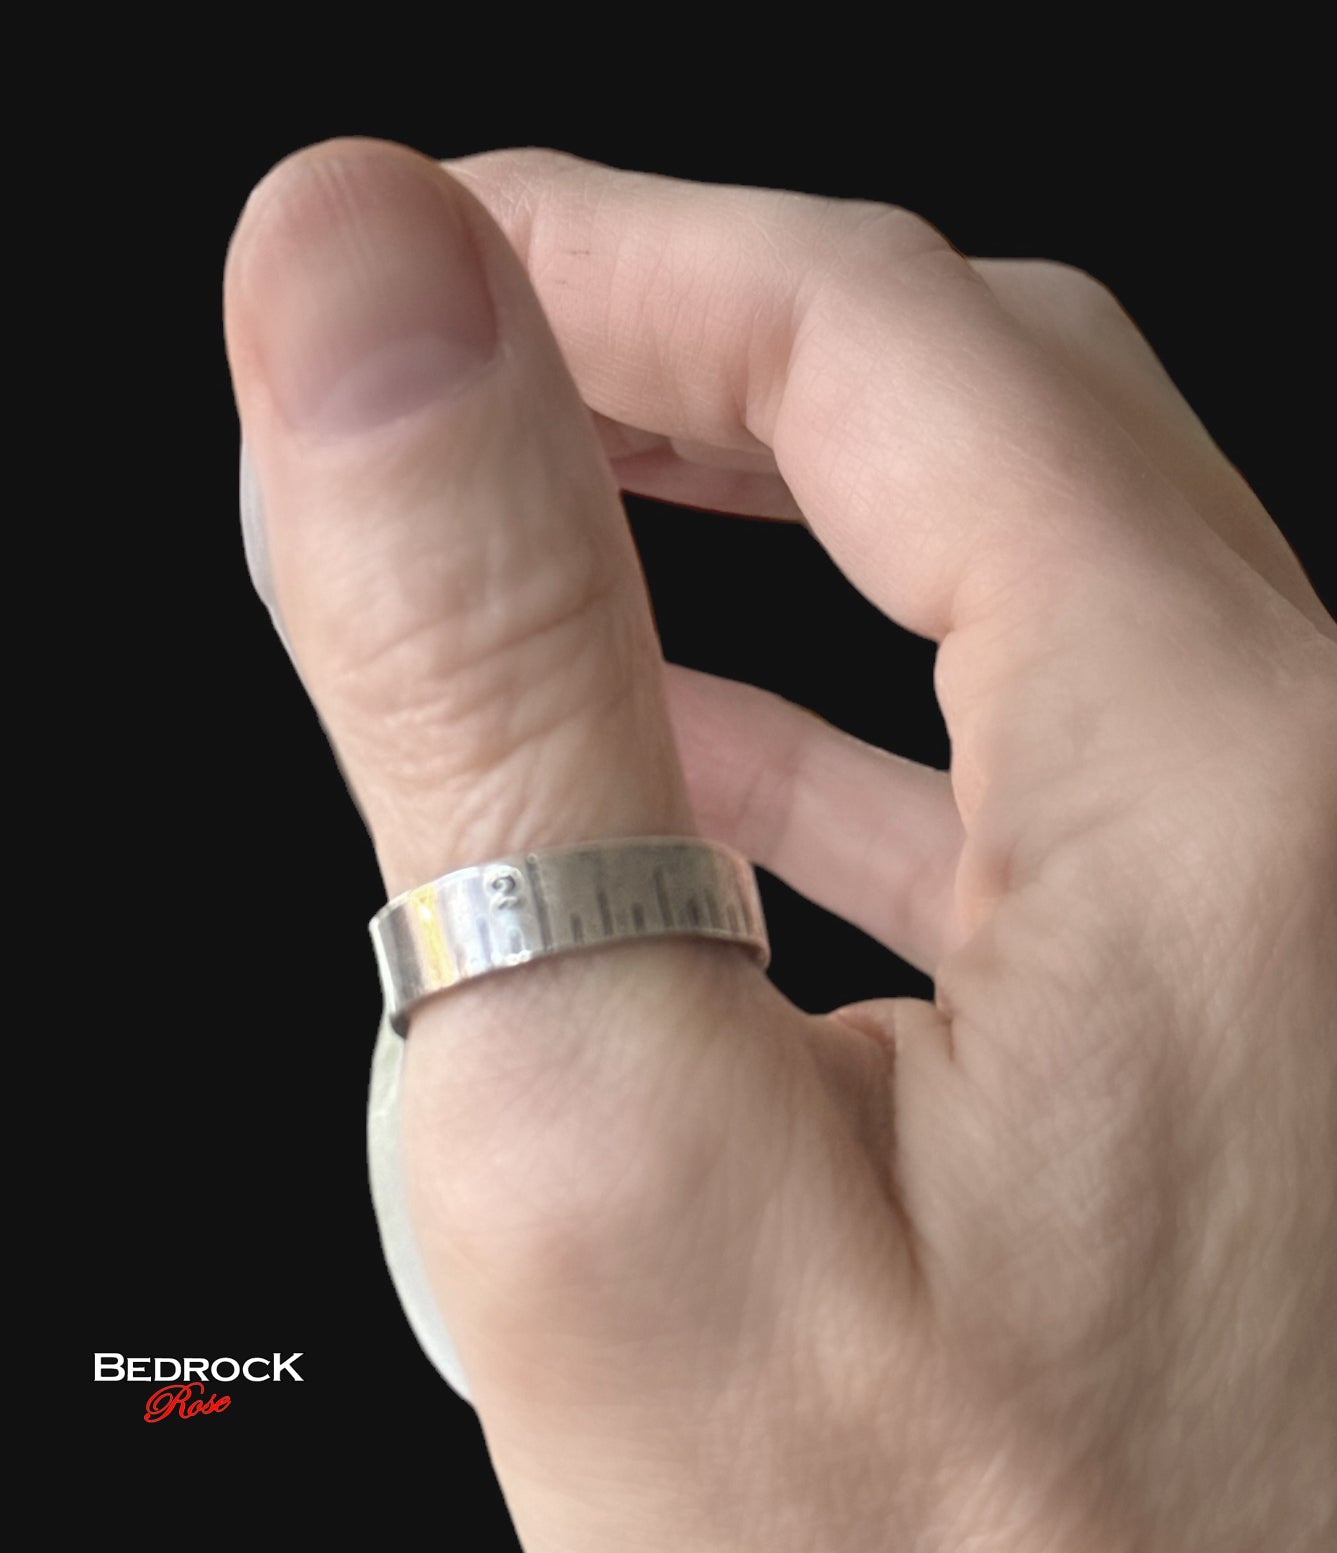 Sterling Silver Ring featuring a true-sized ruler in inches.